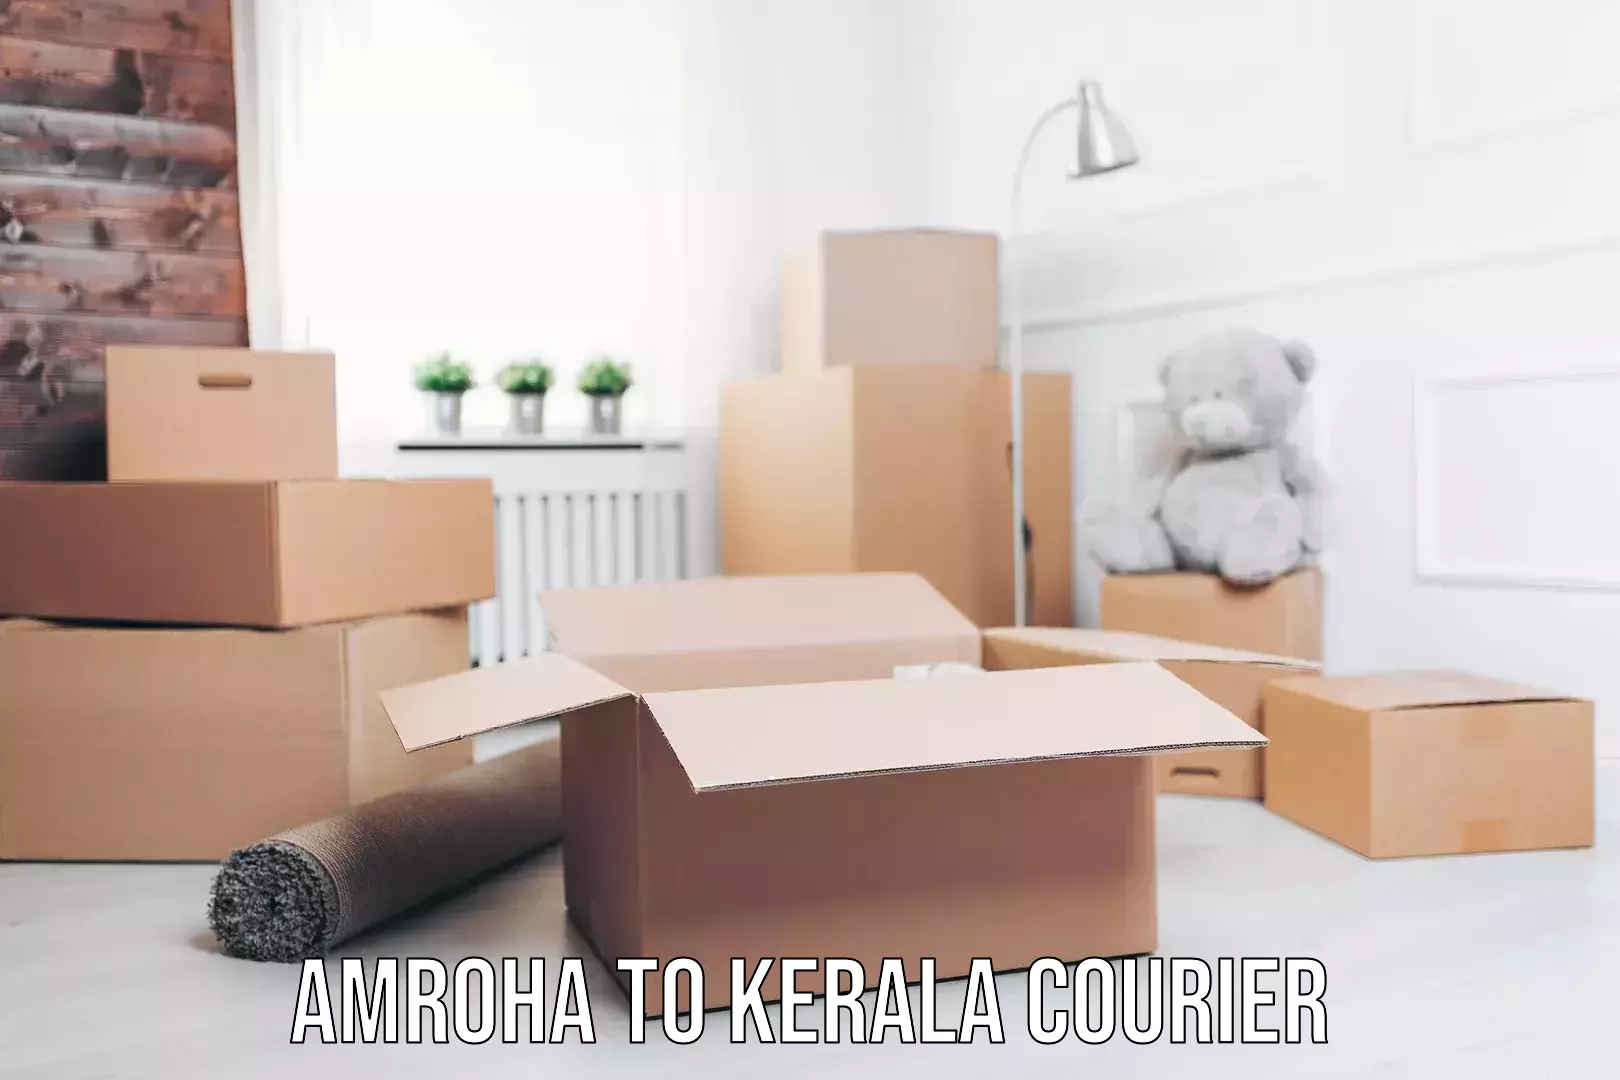 Parcel service for businesses Amroha to Kerala